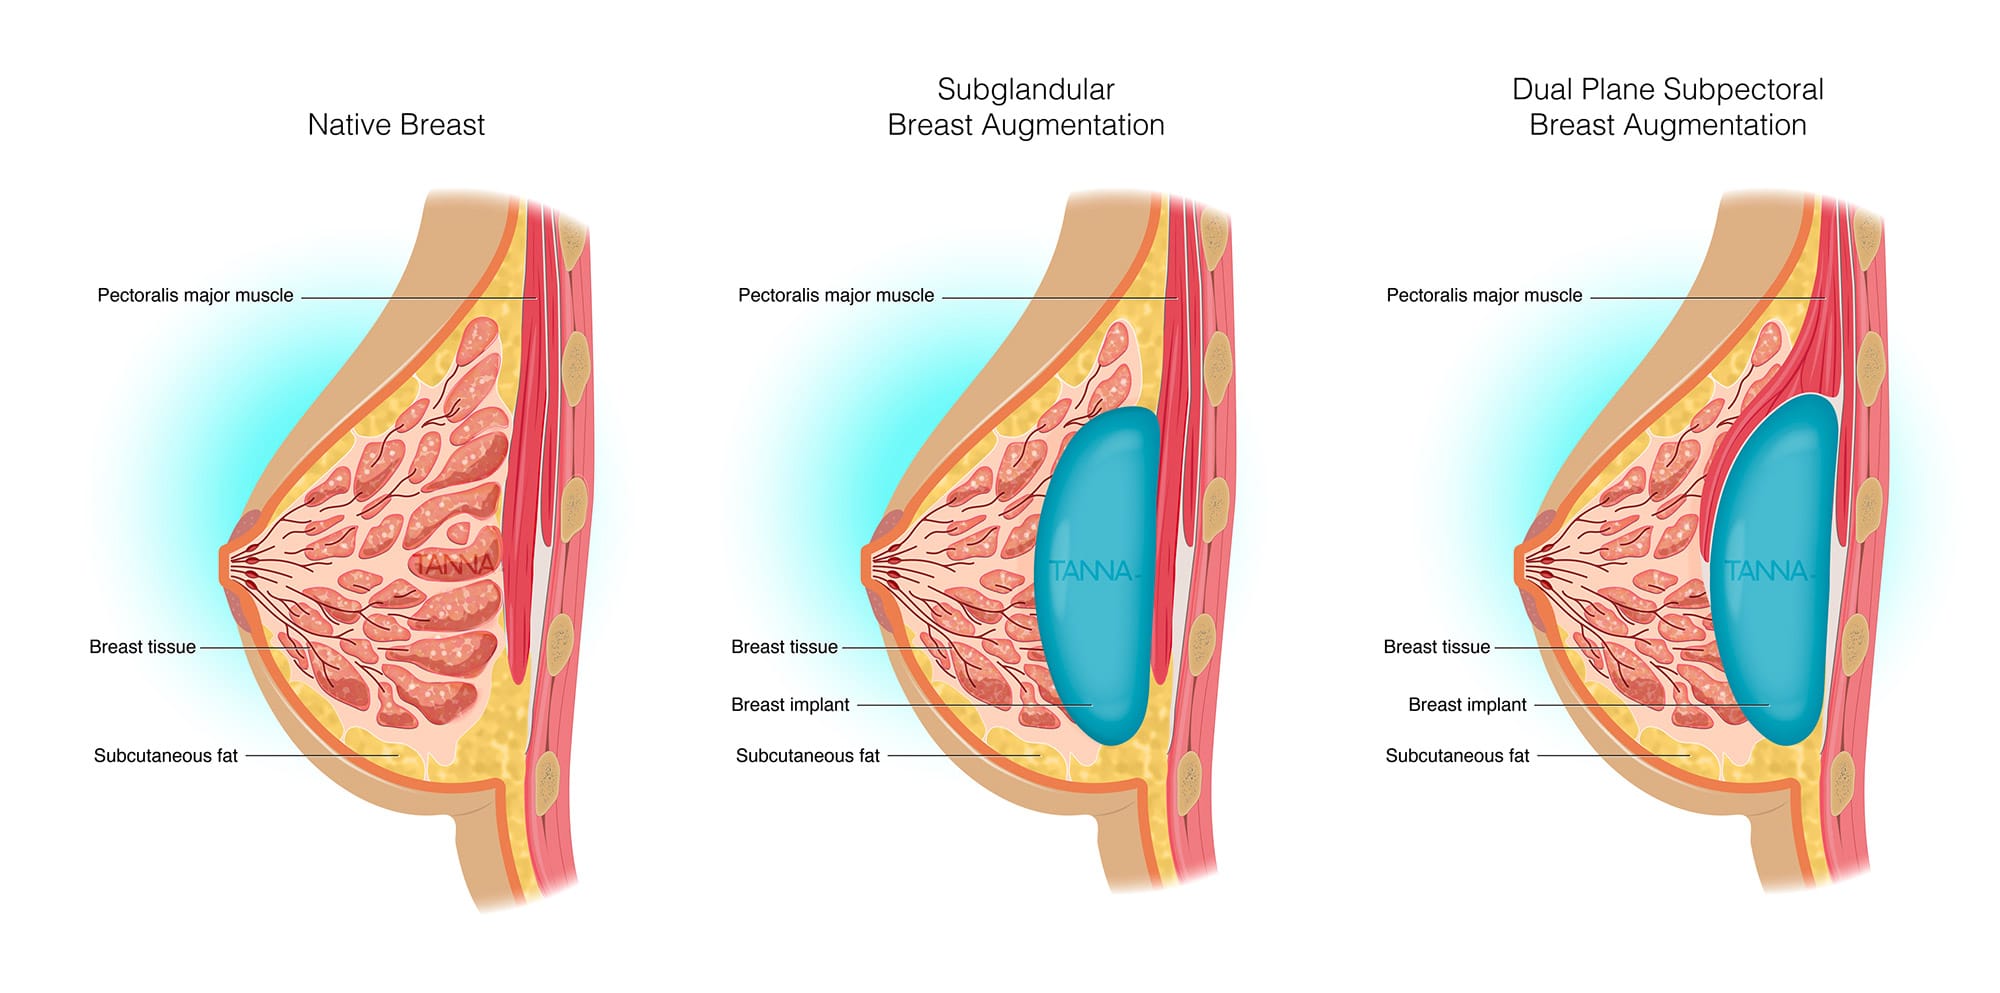 Comparison of natural breast with subglandular and dual plane pectoral breast augmentations